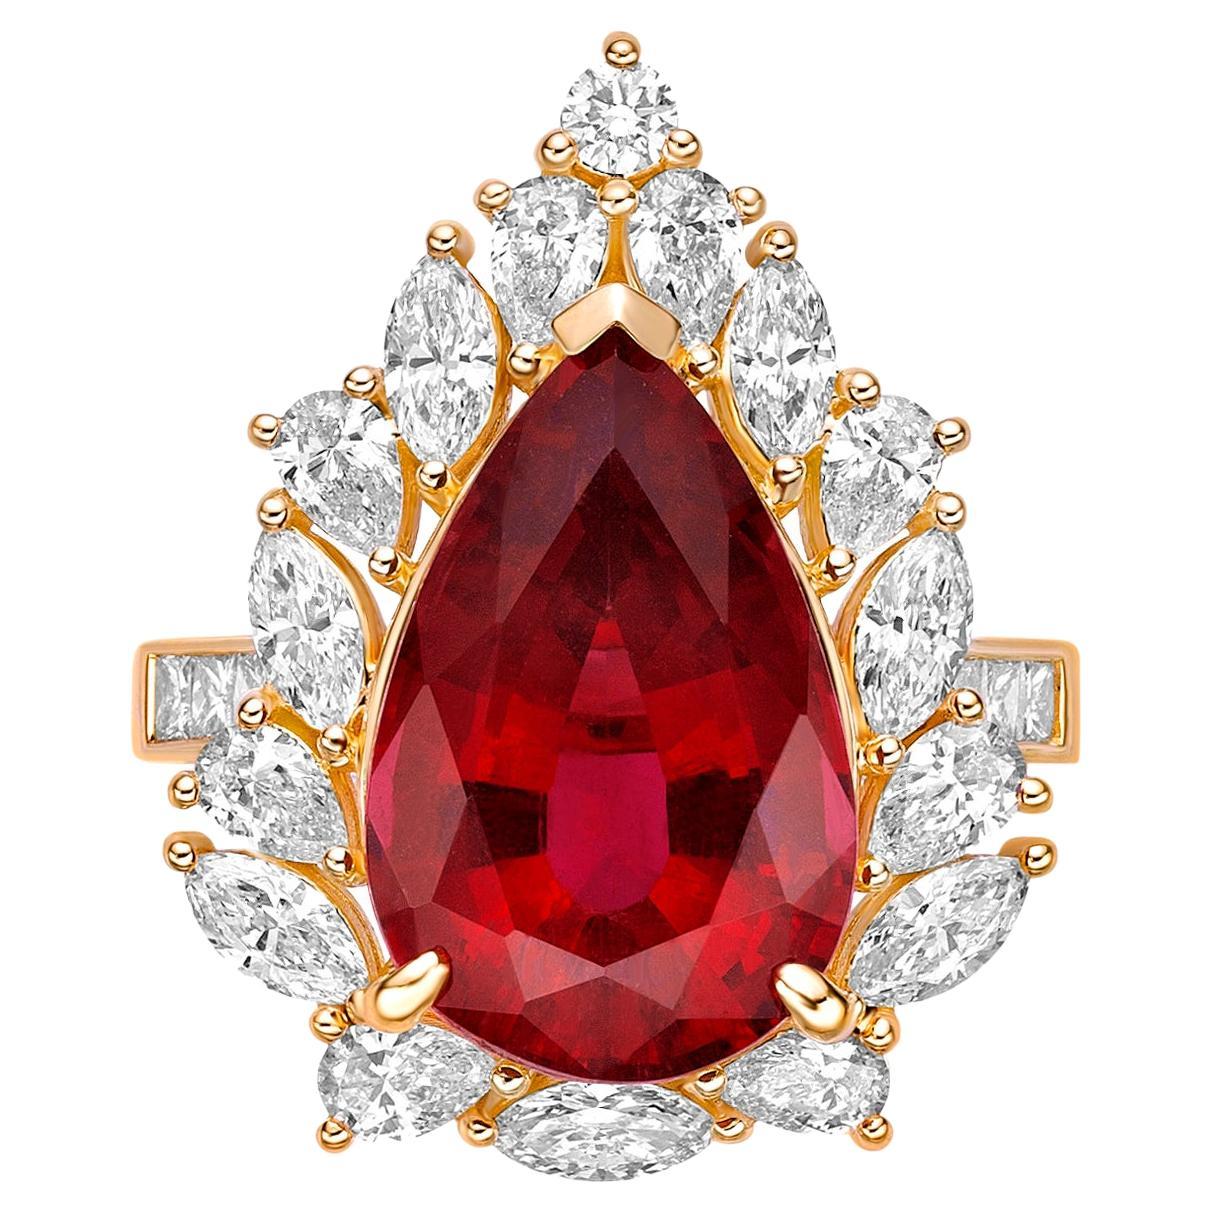 7.784 Carat Rubelite Fancy Ring in 18Karat Yellow Gold with White Diamond. For Sale